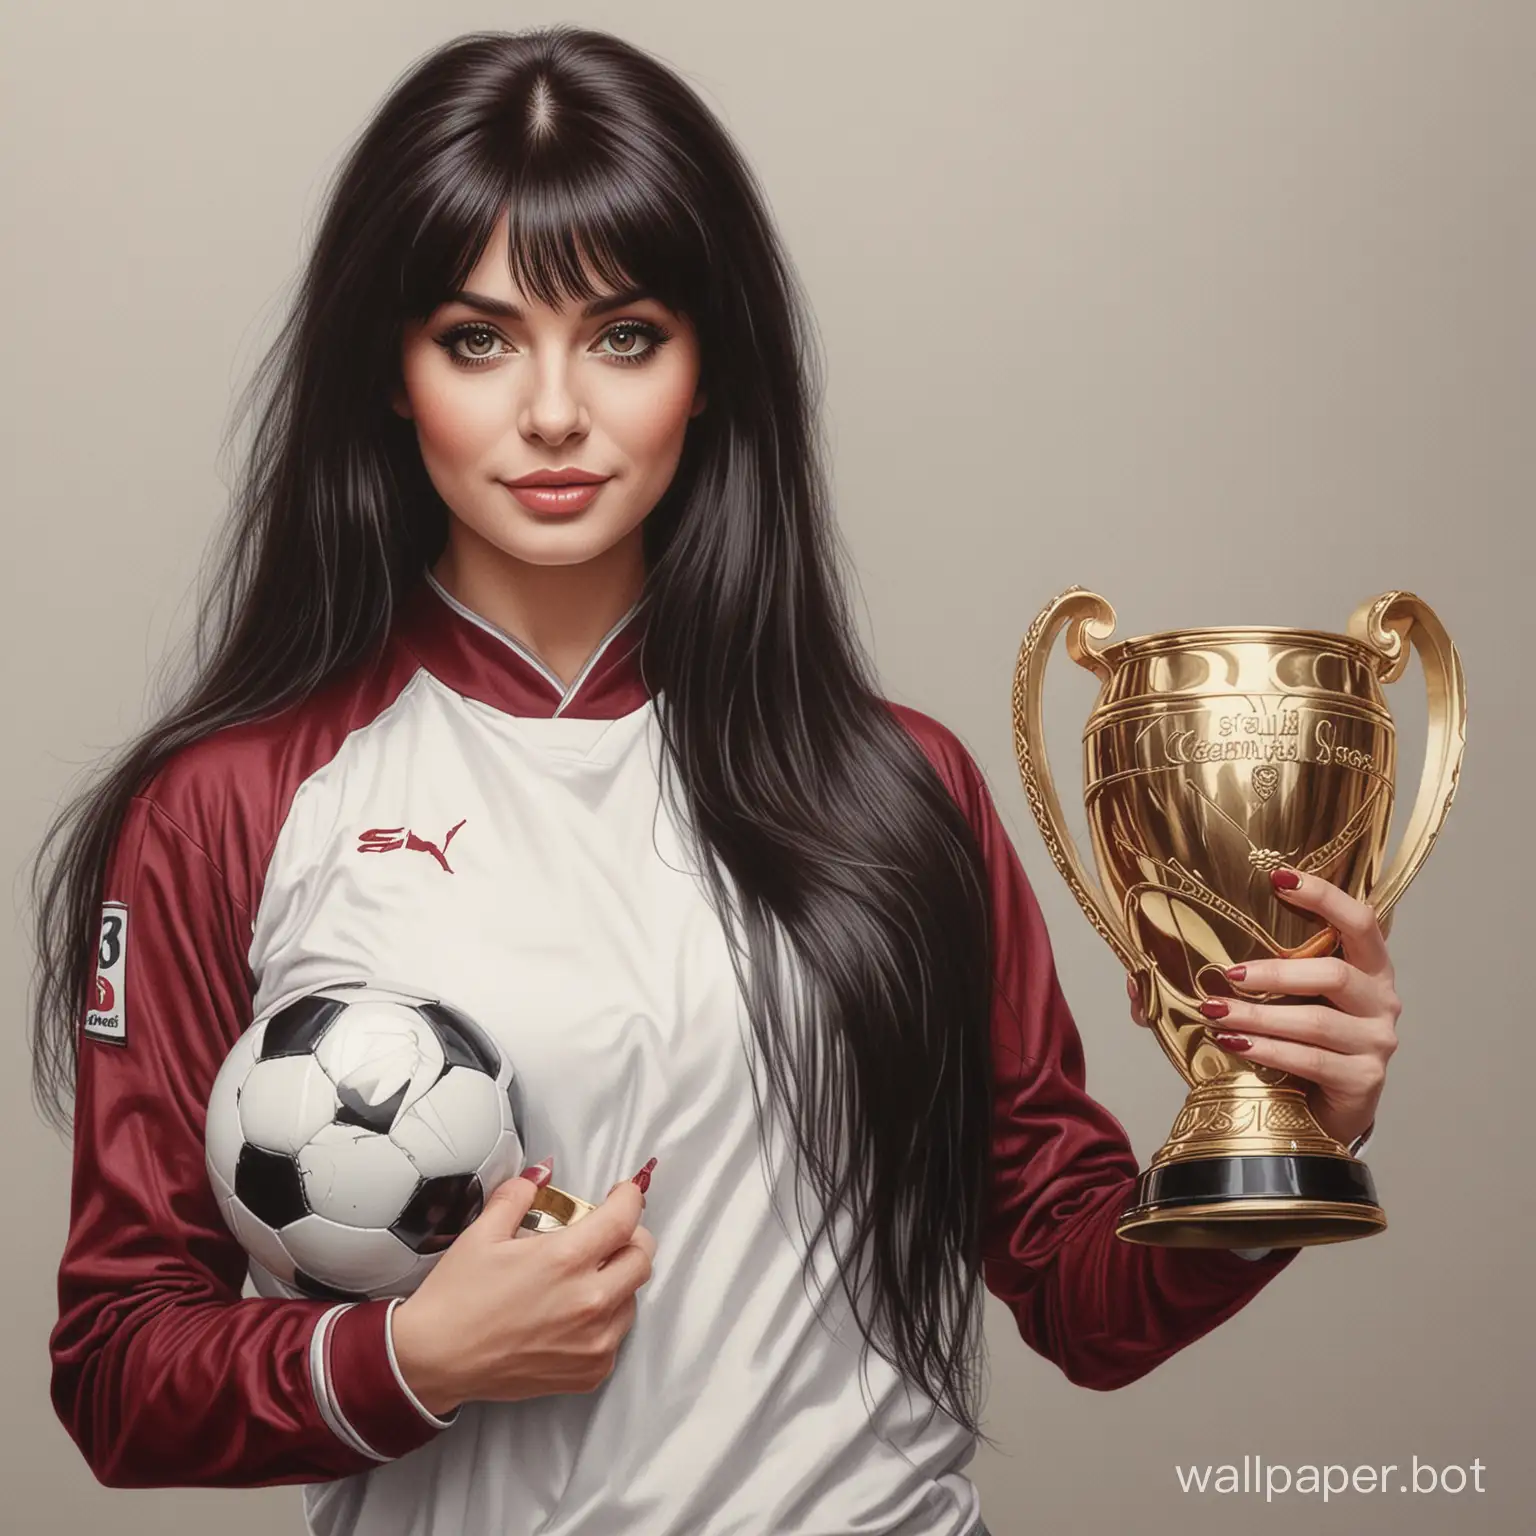 sketch girl Elvira Bazhich 25 years dark long hair 6 breast size narrow waist In burgundy with white soccer uniform holding a big cup of champions white background high realism marker drawing